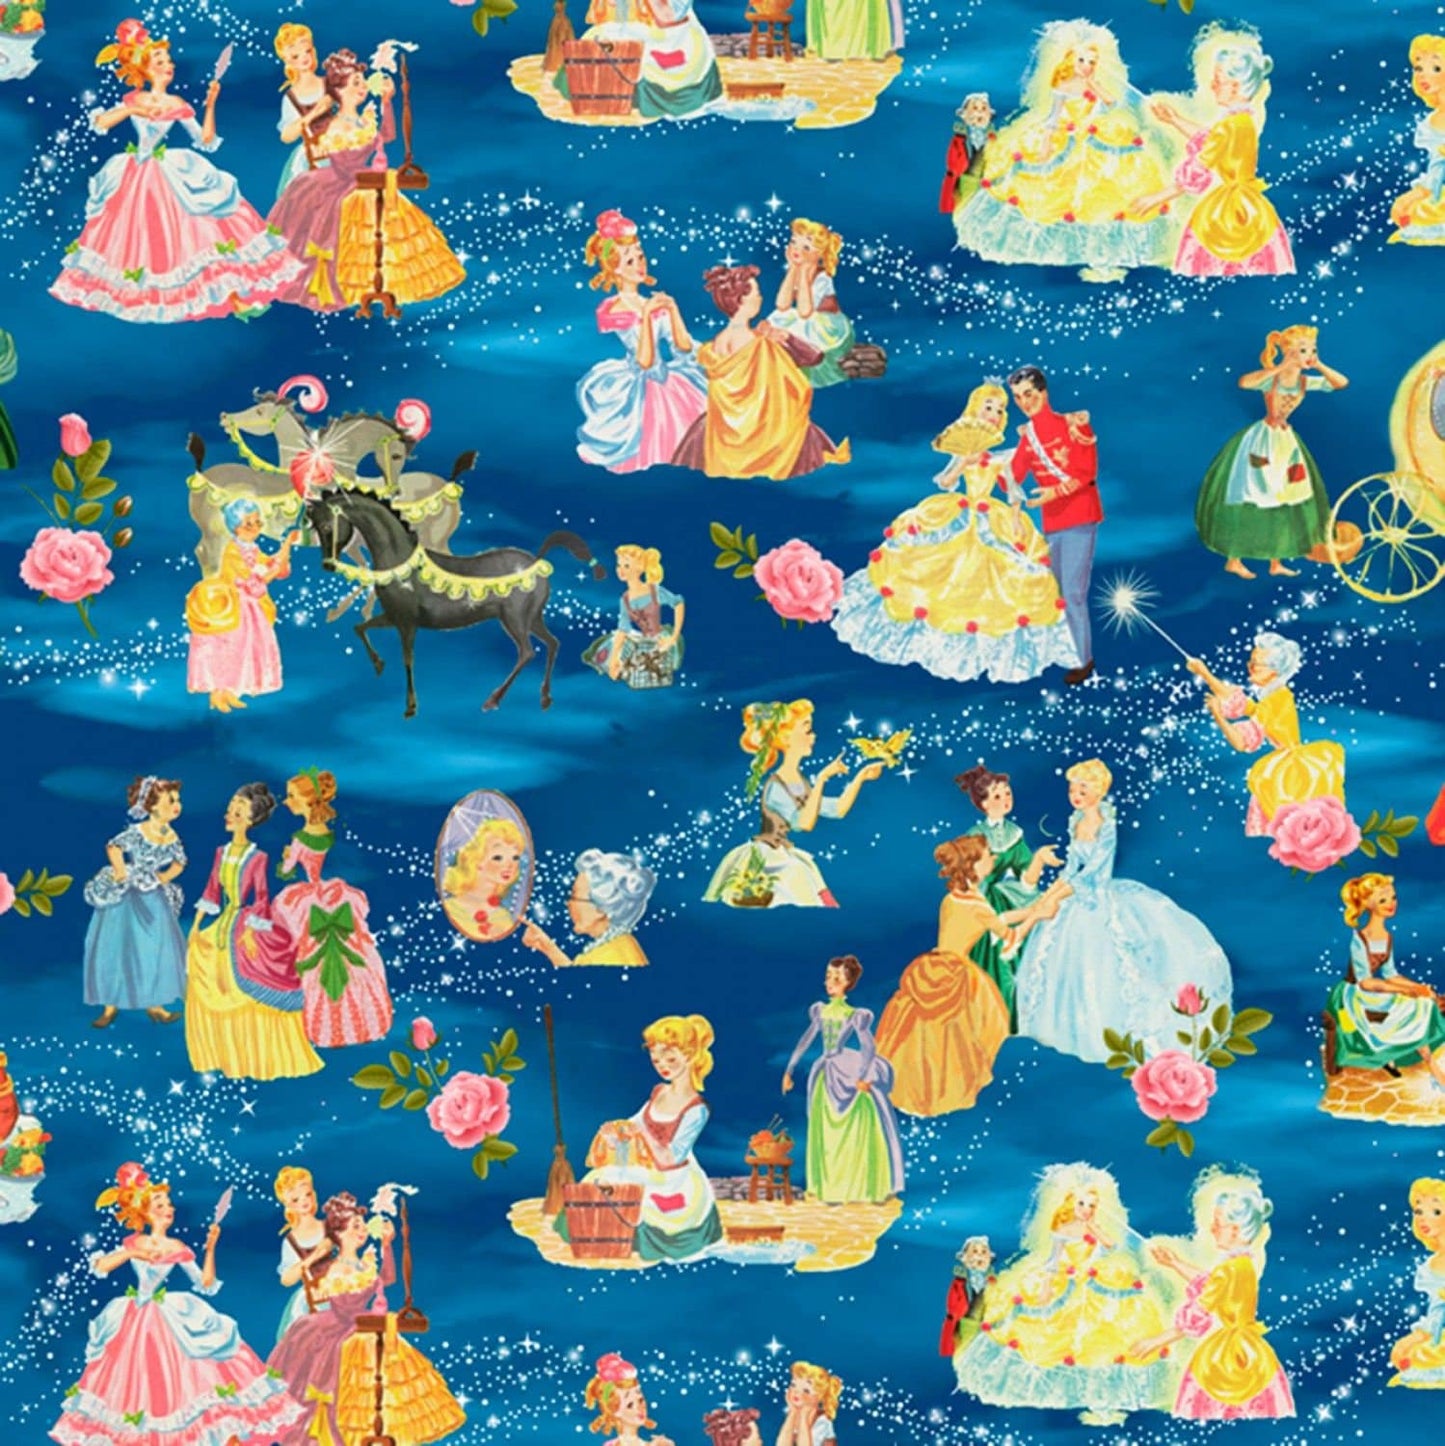 Vintage Storybooks from Four Seasons Cinderella's Tale Allover BW01700C1 Cotton Woven Fabric